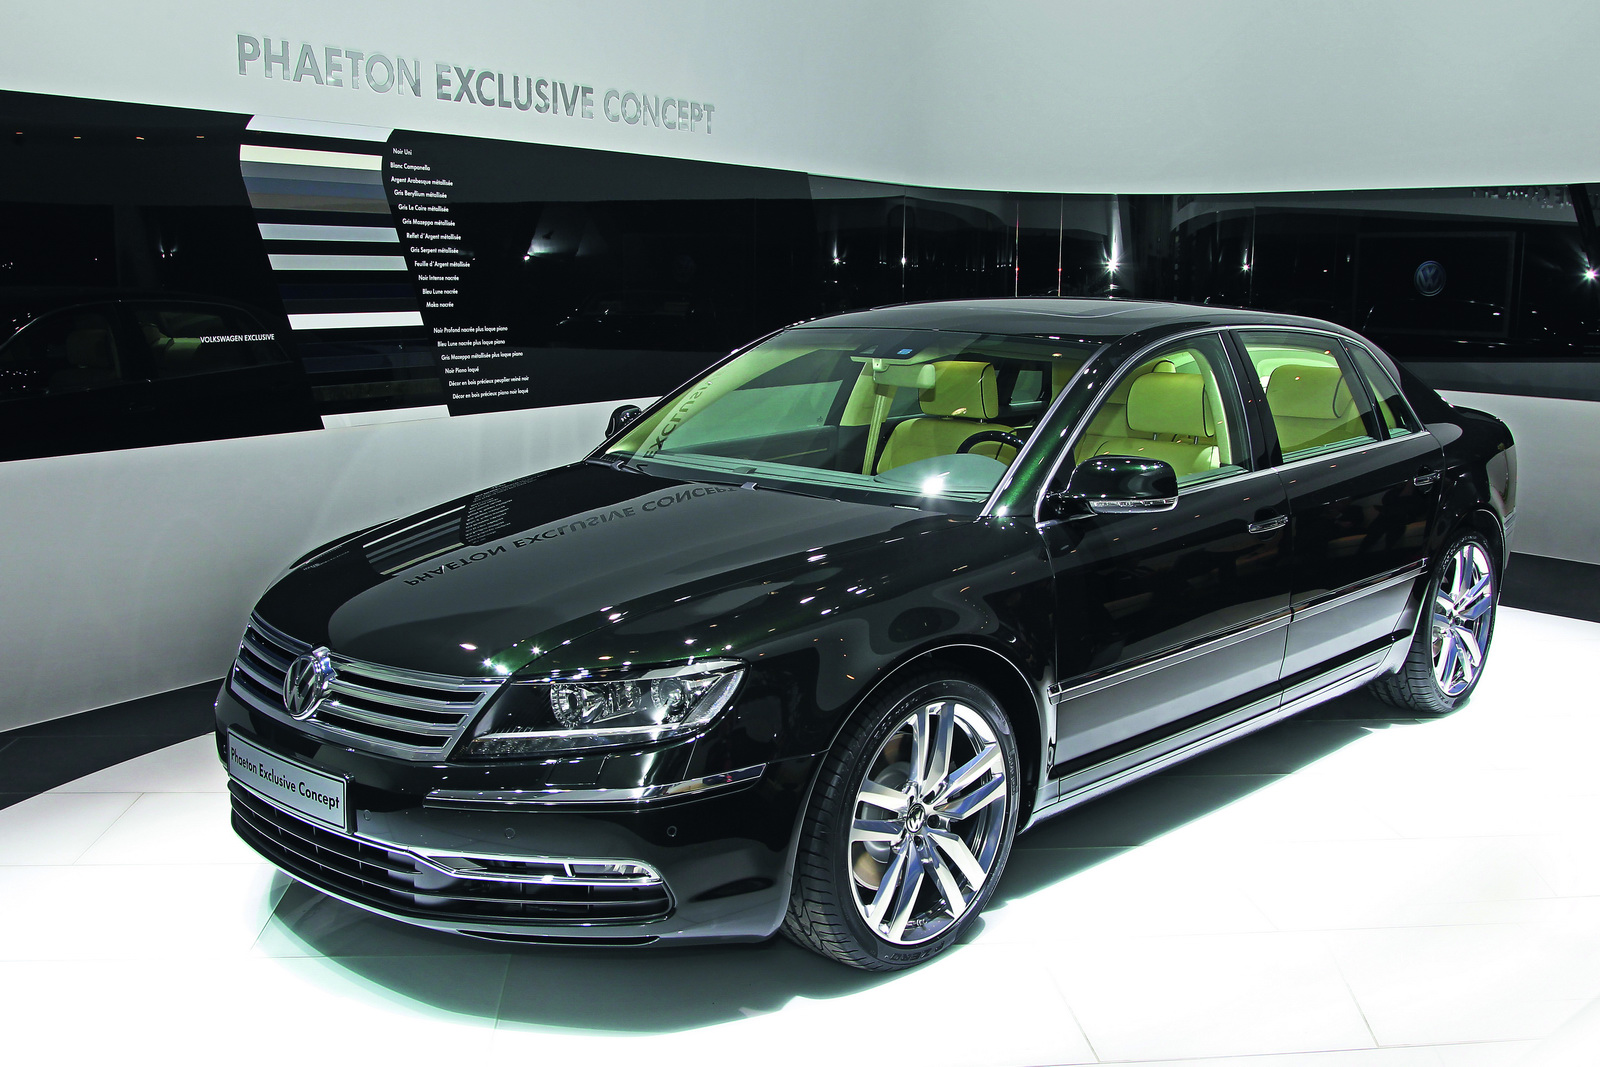 Volkswagen Phaeton will turn into electric car